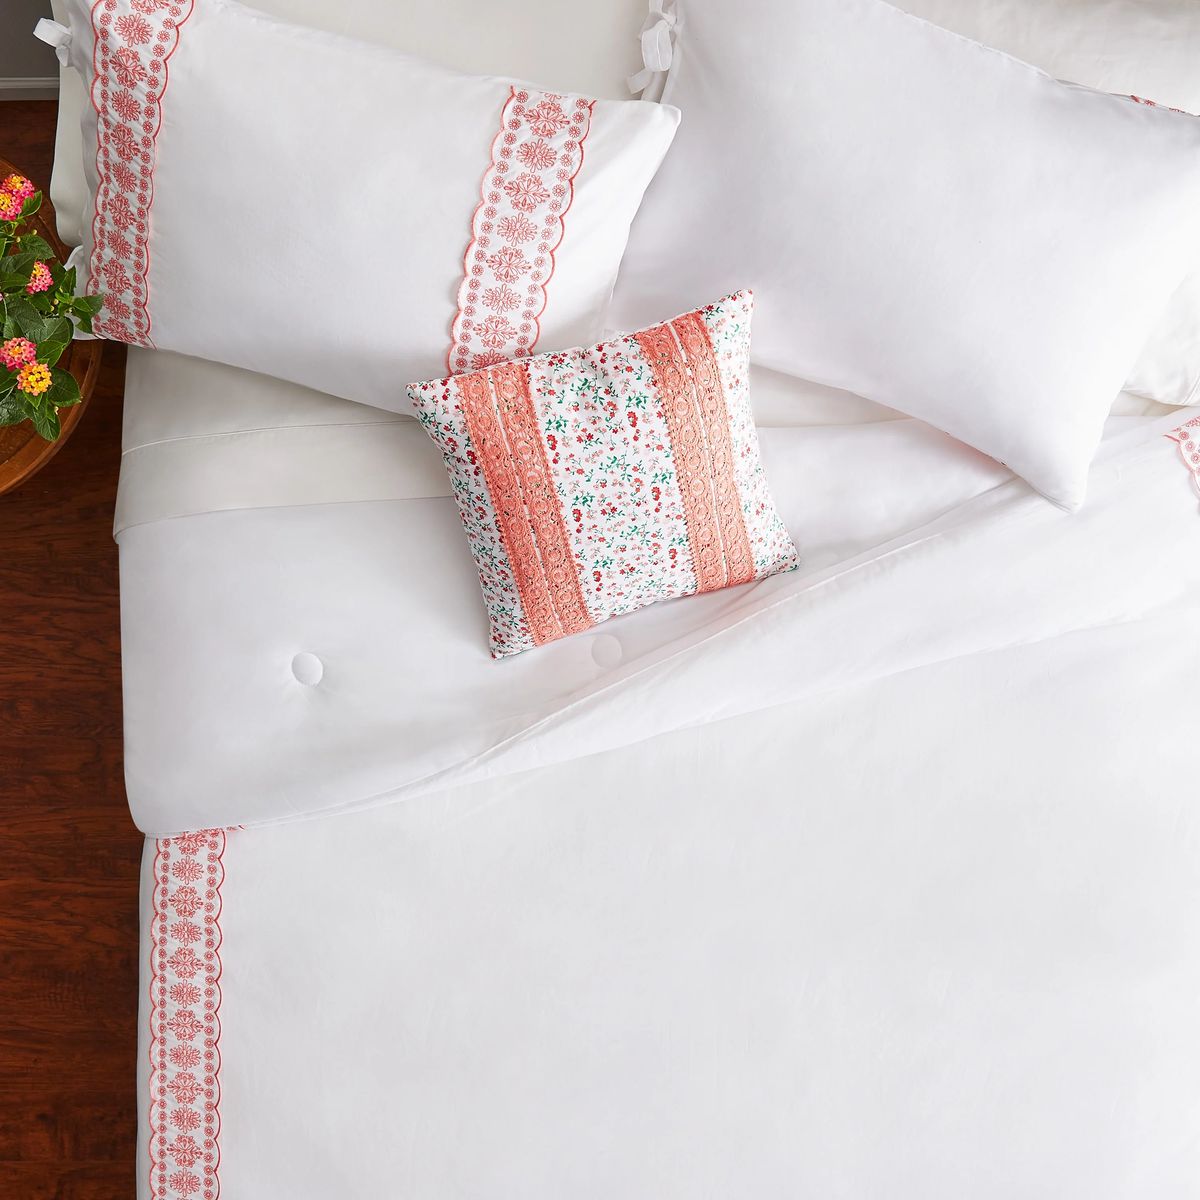 The Pioneer Woman Bedding at Walmart - Where to Buy Ree Drummond's Bedding